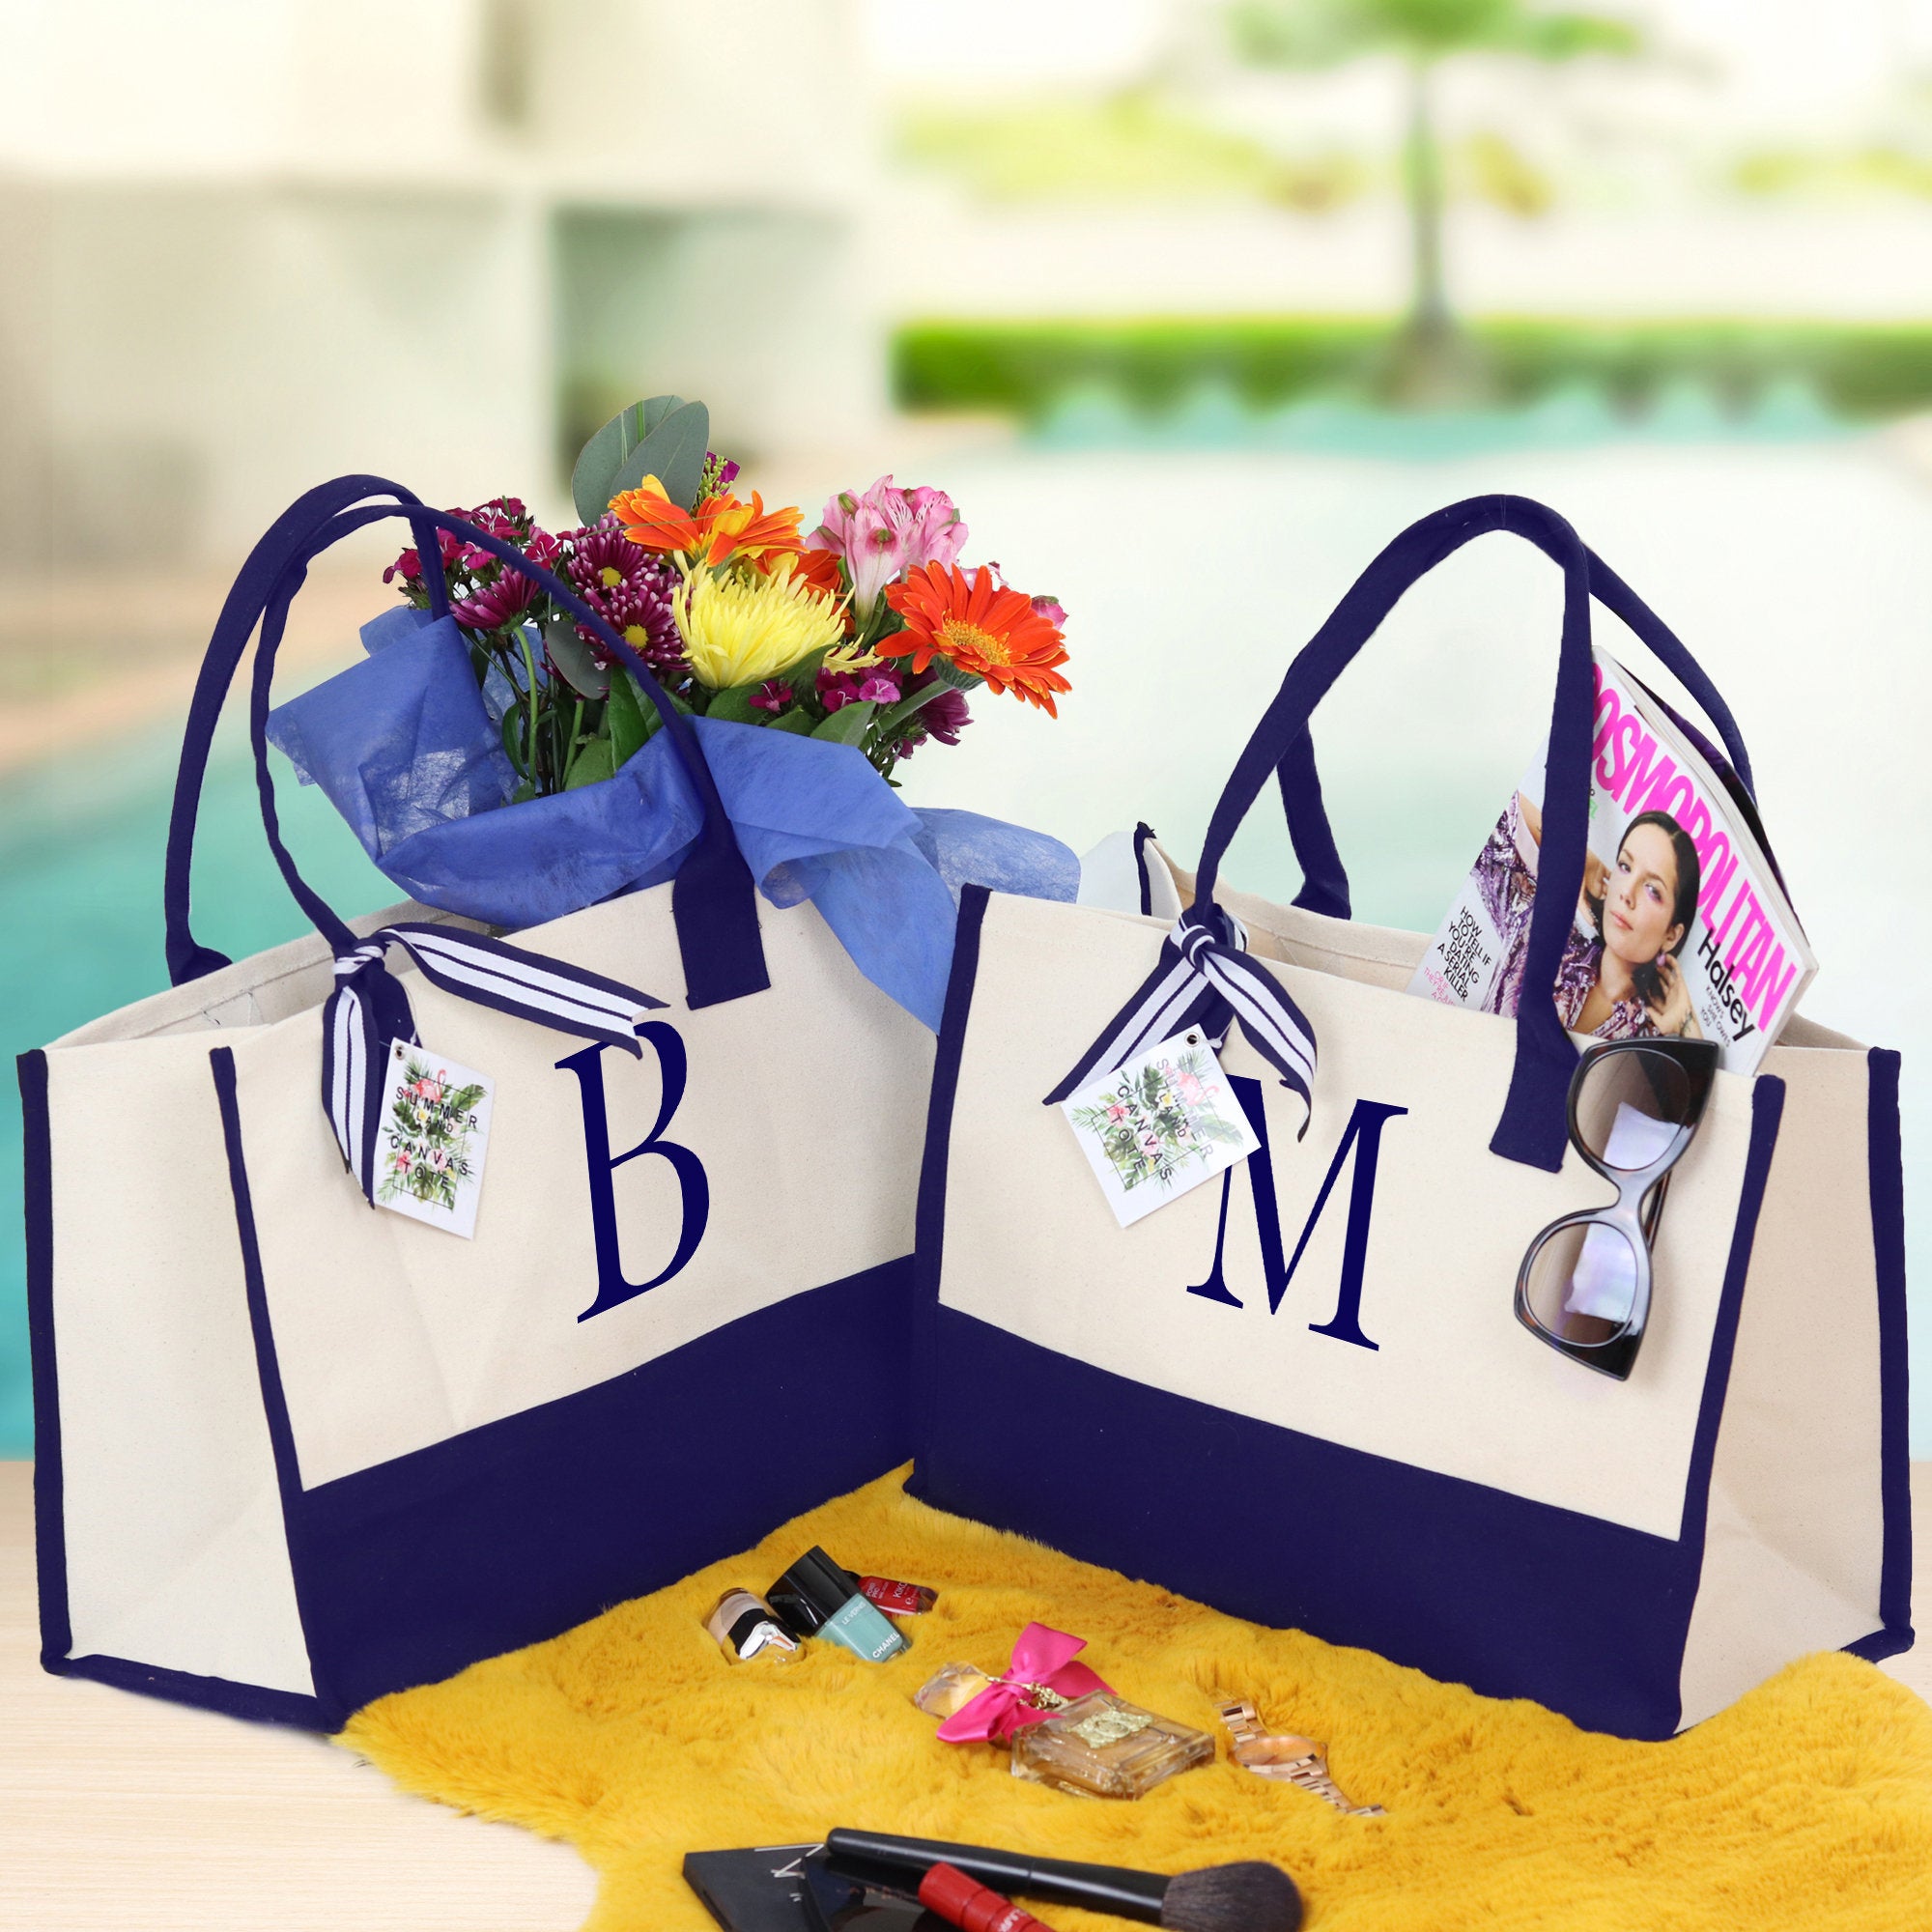 Graduation gift Tote Bags for Women Personalize, Embroidery Initial Monogram Large Bag for Mom, 100% Cotton Canvas, Bridesmaid  Gift Navy